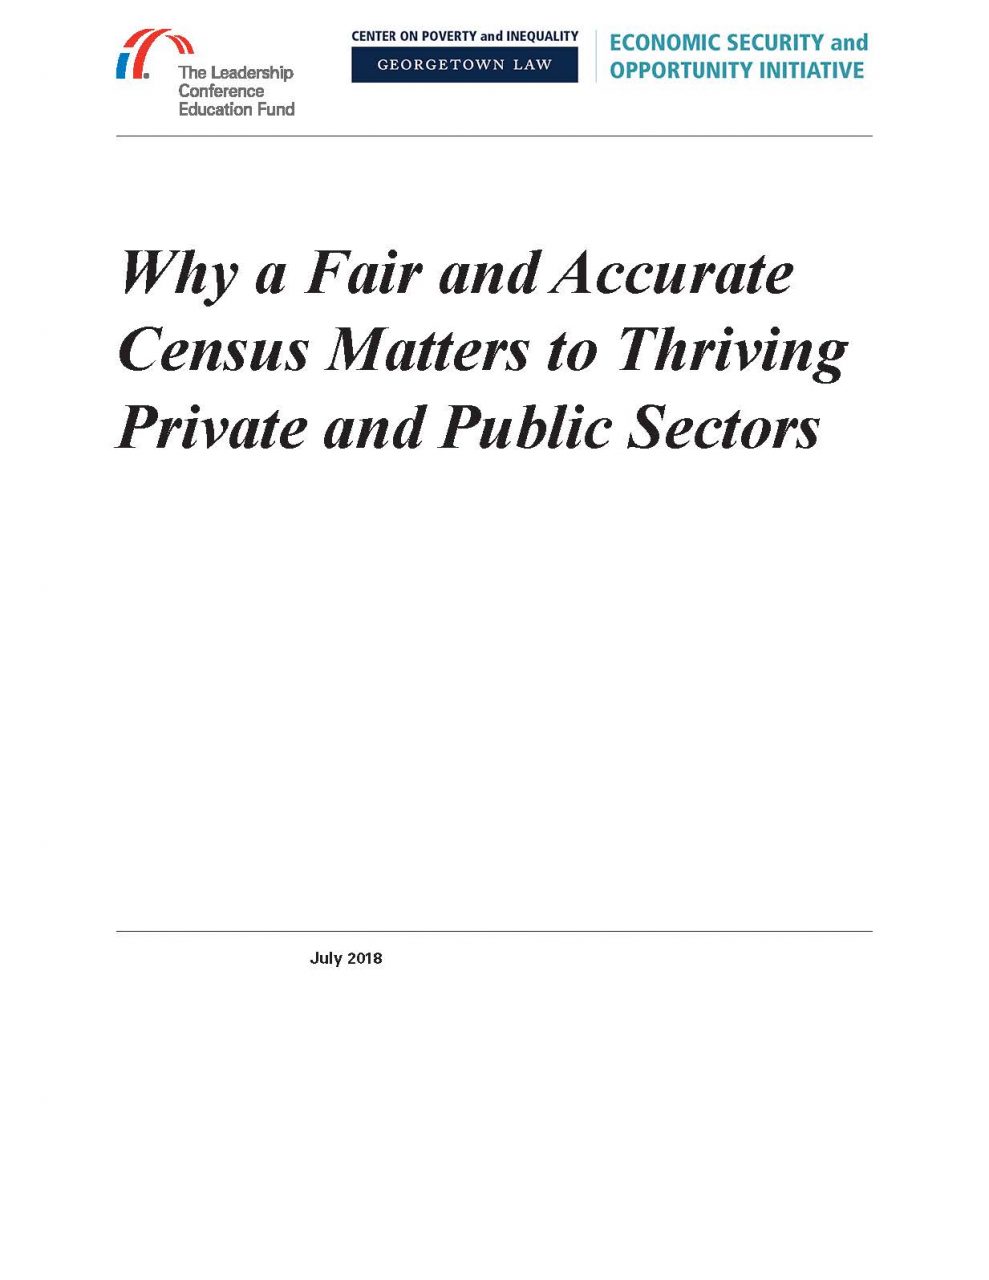 Why a Fair and Accurate Census Matters to Thriving Private and Public Sectors Report cover